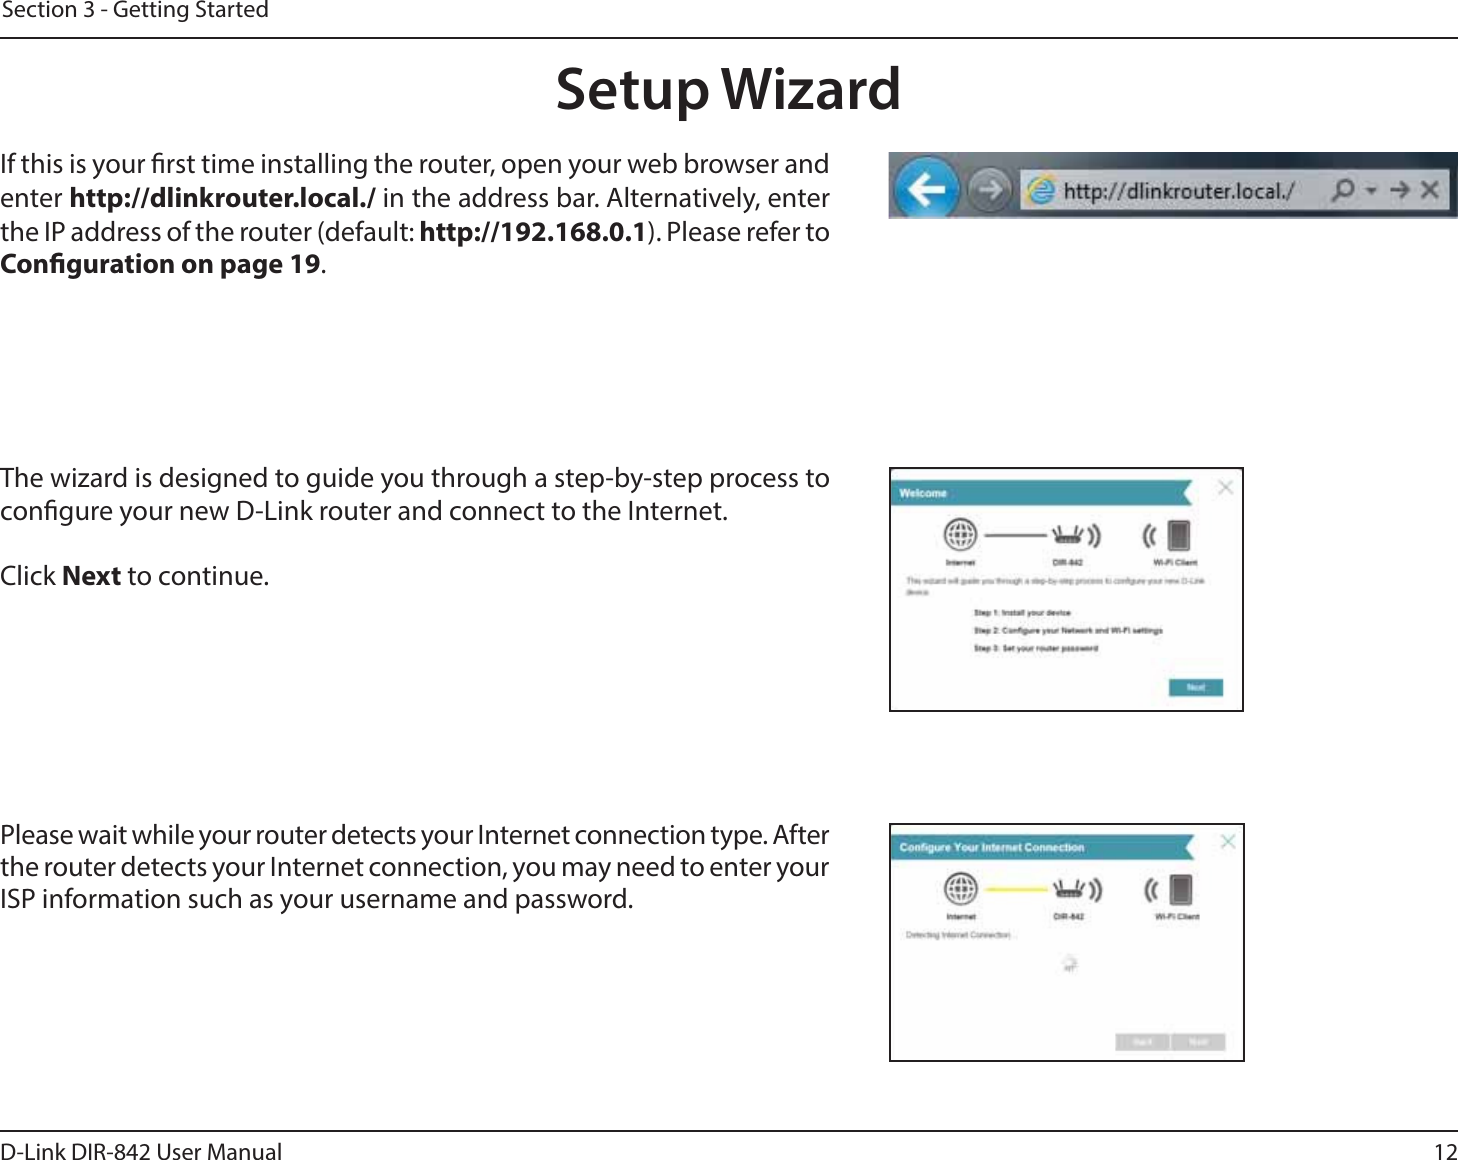 12D-Link DIR-842 User ManualSection 3 - Getting StartedThe wizard is designed to guide you through a step-by-step process to congure your new D-Link router and connect to the Internet.Click Next to continue. Setup WizardIf this is your rst time installing the router, open your web browser and enter IUUQEMJOLSPVUFSMPDBMin the address bar. Alternatively, enter UIF*1BEESFTTPGUIFSPVUFSEFGBVMUIUUQ Please refer to Conguration on page 19.Please wait while your router detects your Internet connection type. After the router detects your Internet connection, you may need to enter your ISP information such as your username and password.